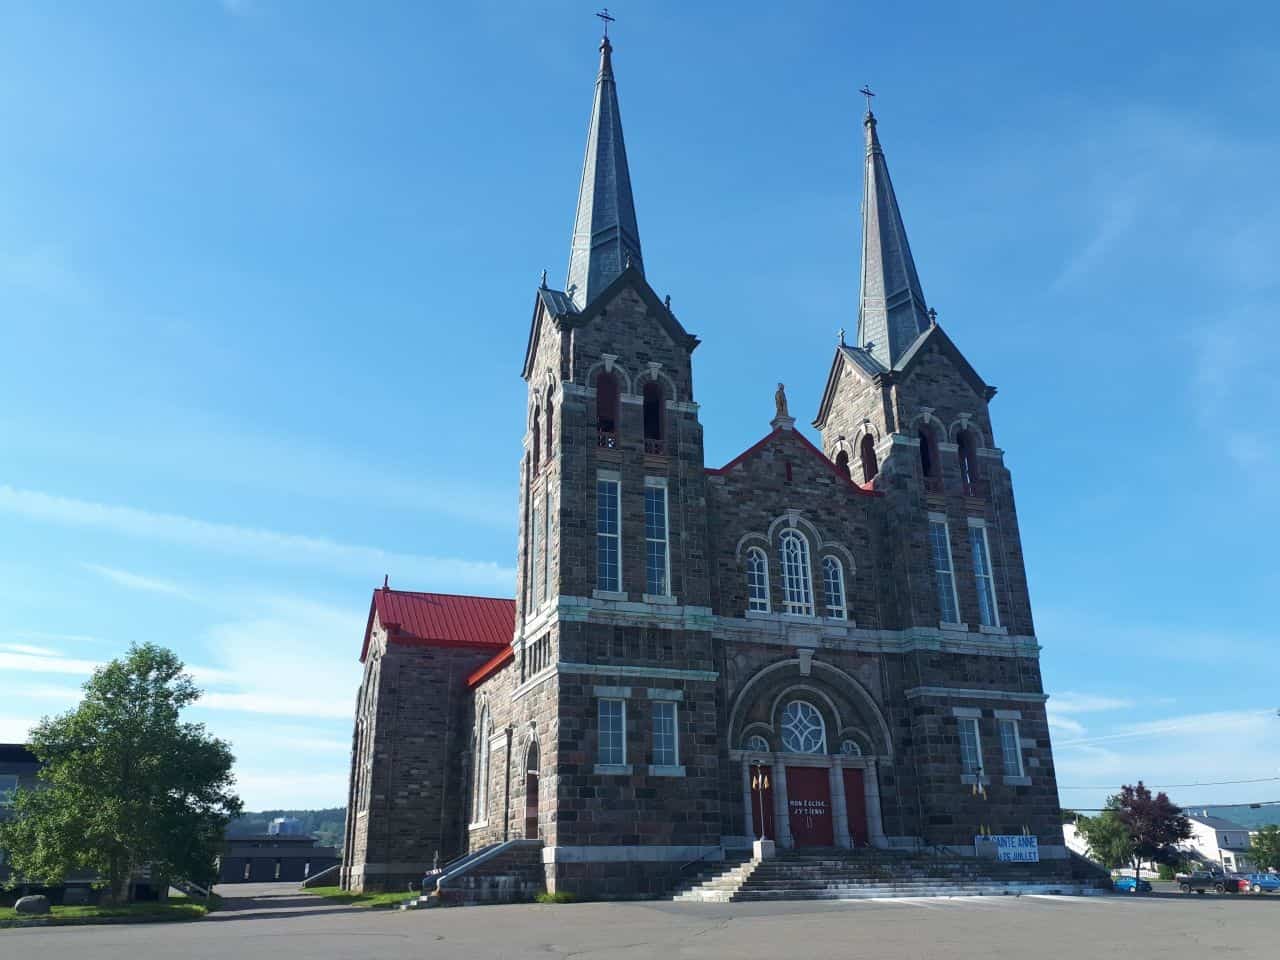 Road trip to the Gaspe Peninsula provided some great architecture like the Church of Sainte-Anne